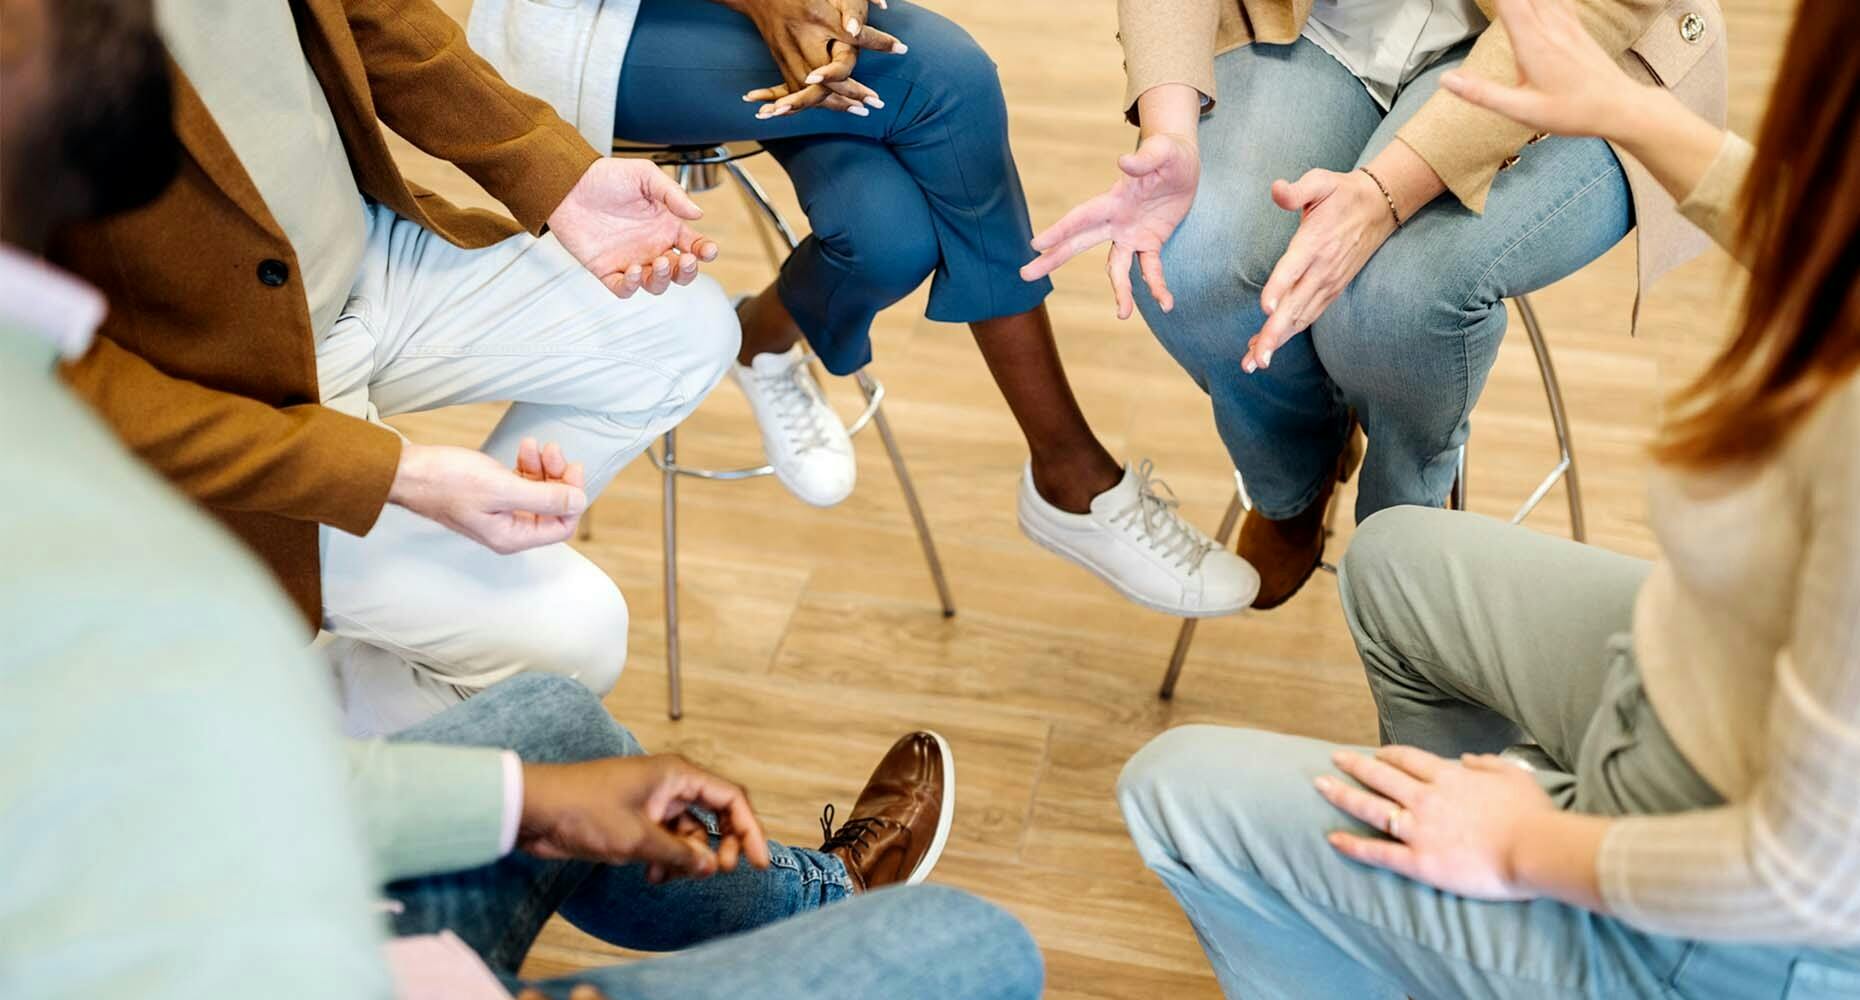 Group sitting on stools in a tight circle